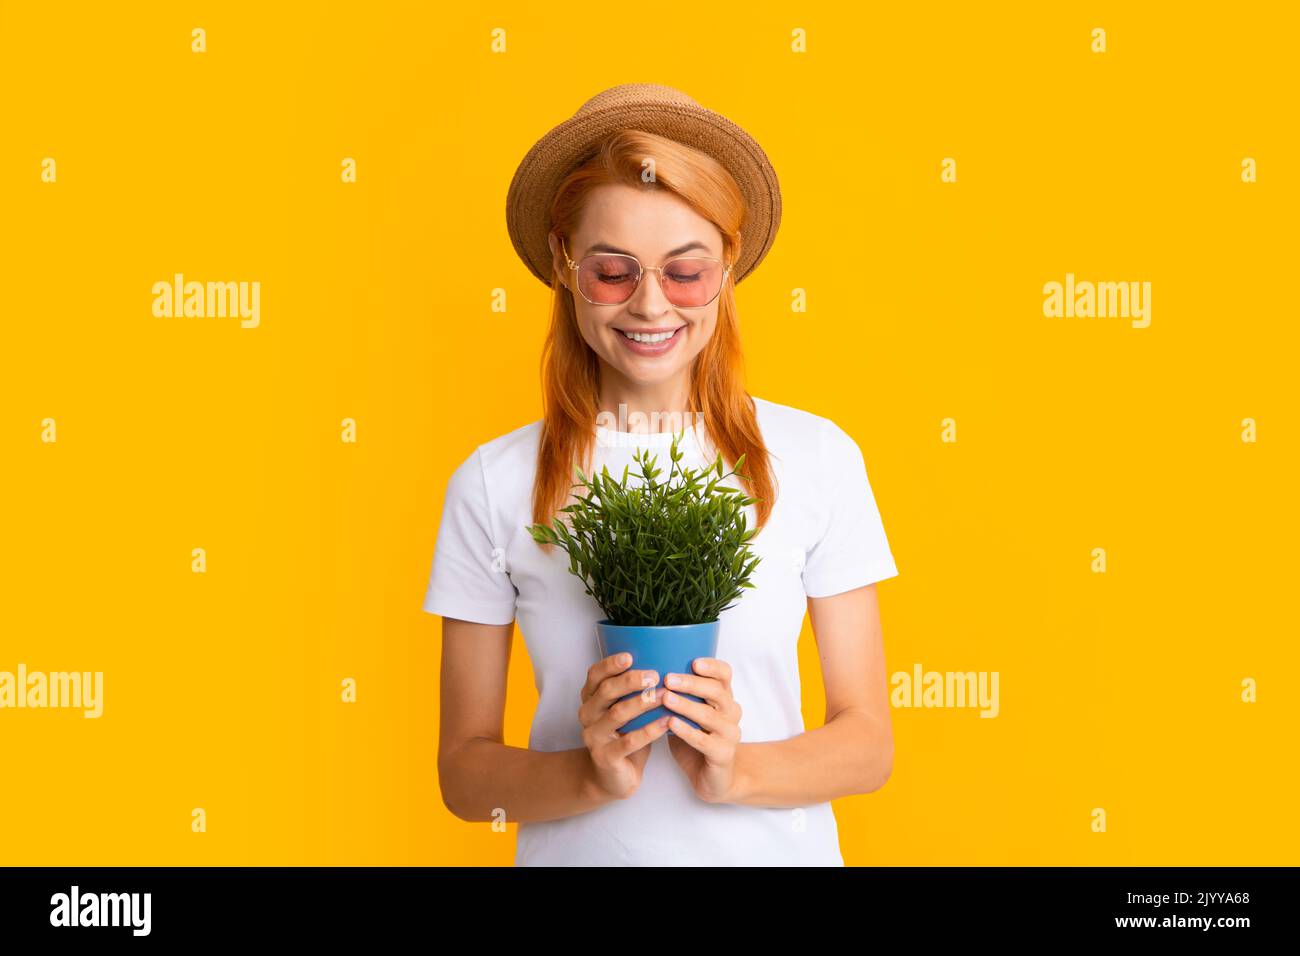 Woman planting flowers in pot isolated on yellow studio background. Pretty model working, summer gardening concept. Stock Photo